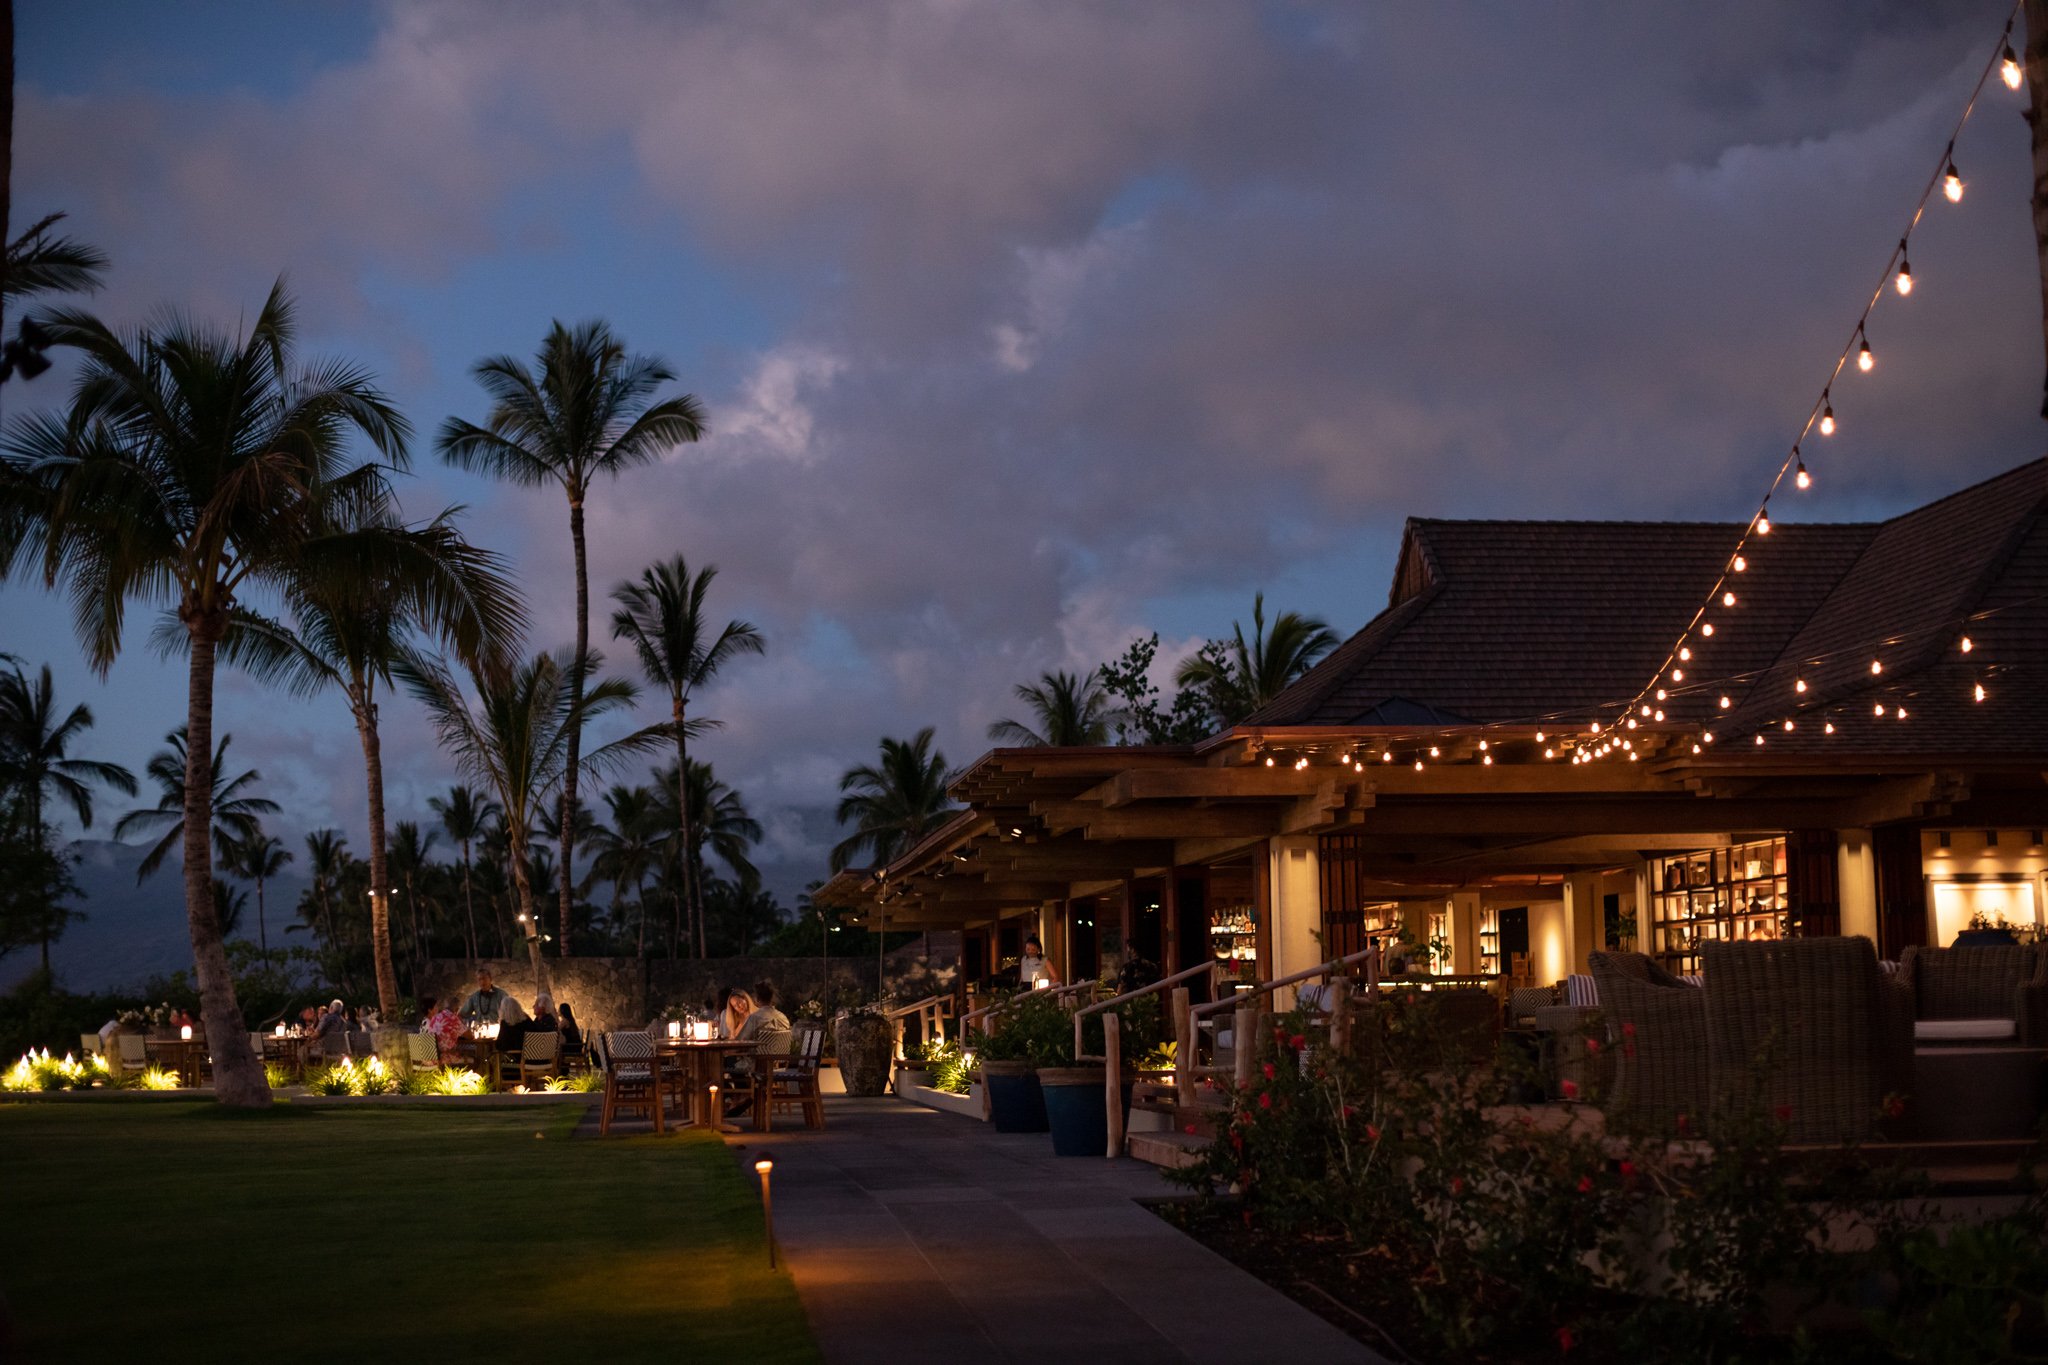  The CanoeHouse at Mauna Lani offers a contemporary indoor-outdoor space with scenic views of the Pacific Ocean, delicious farm-to-table menu and warm hospitality.  Photos courtesy Mauna Lani, Auberge Resorts Collection  